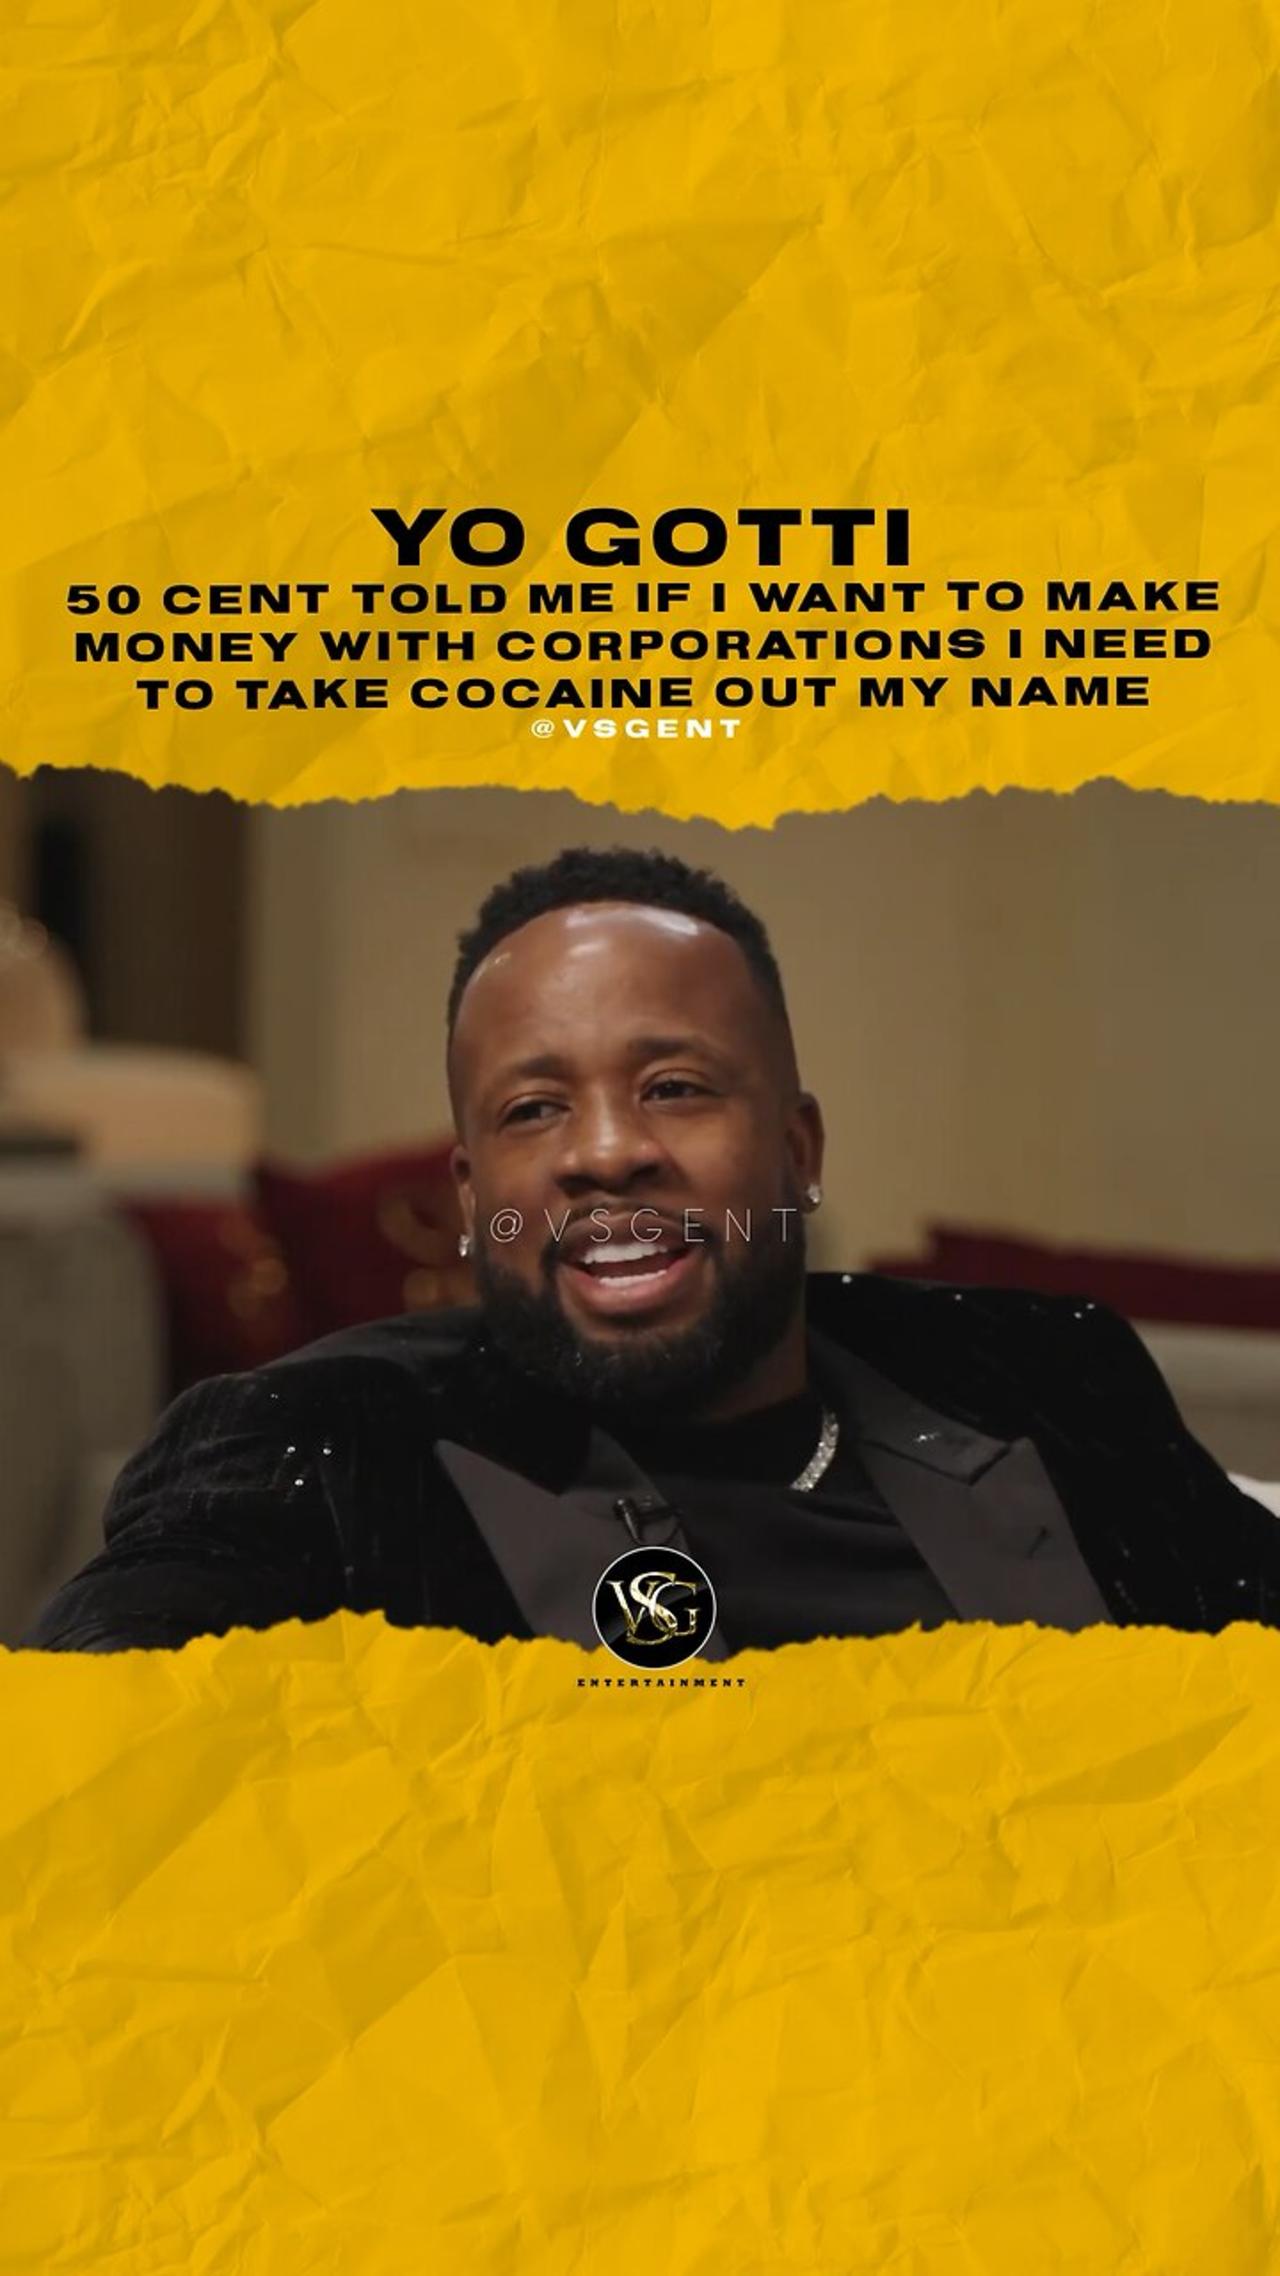 @50cent told me If I want to make money with corporations I need to take ❄️ out my name.